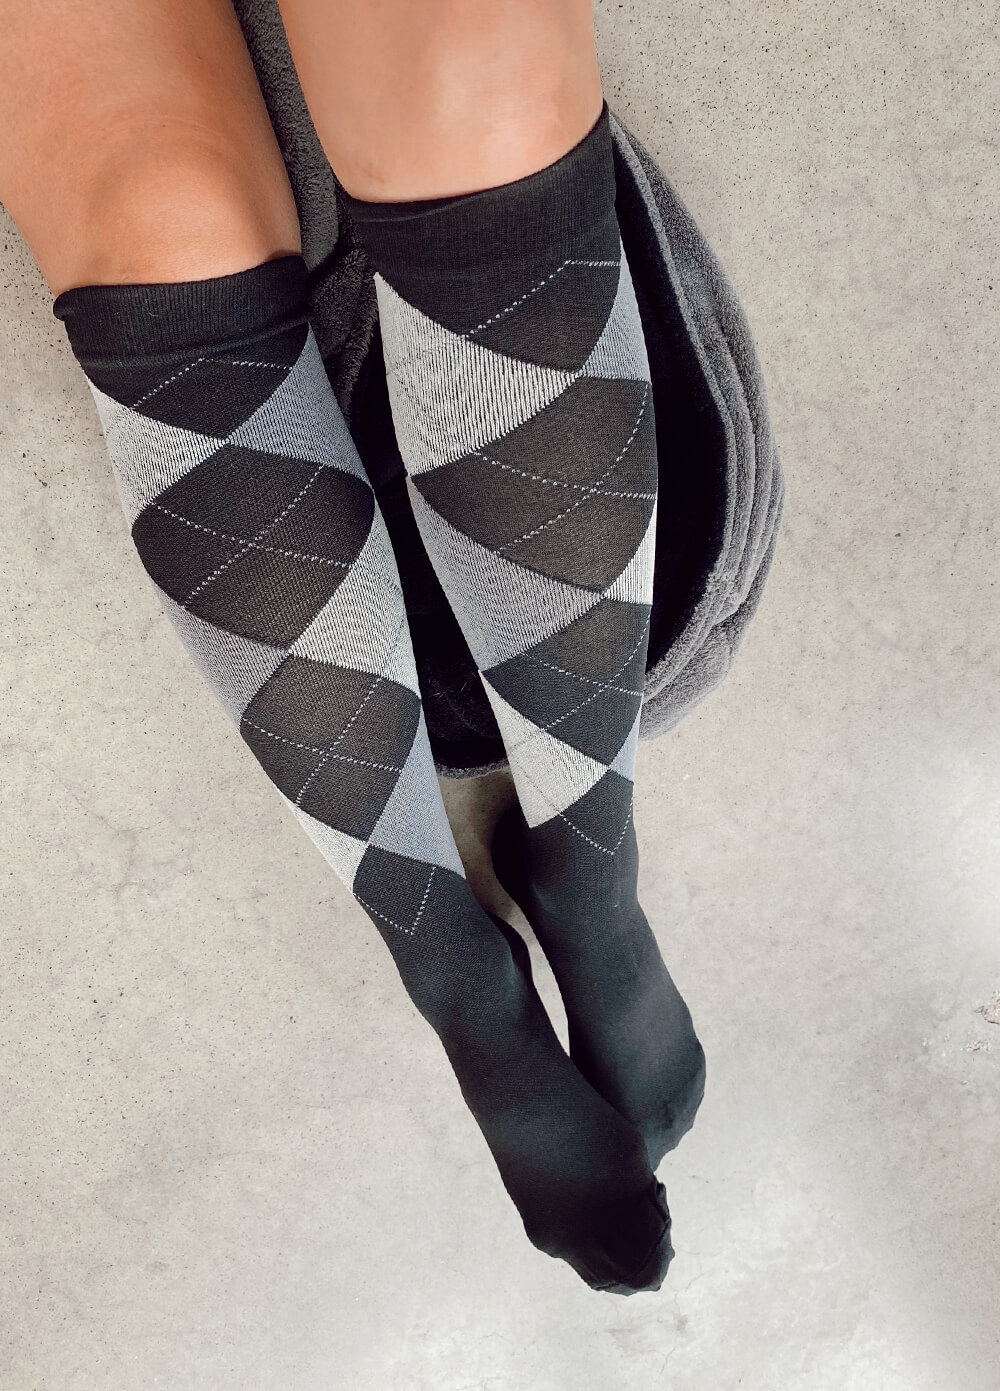 Mama Sox - Excite Maternity Compression Socks in Black Argyle